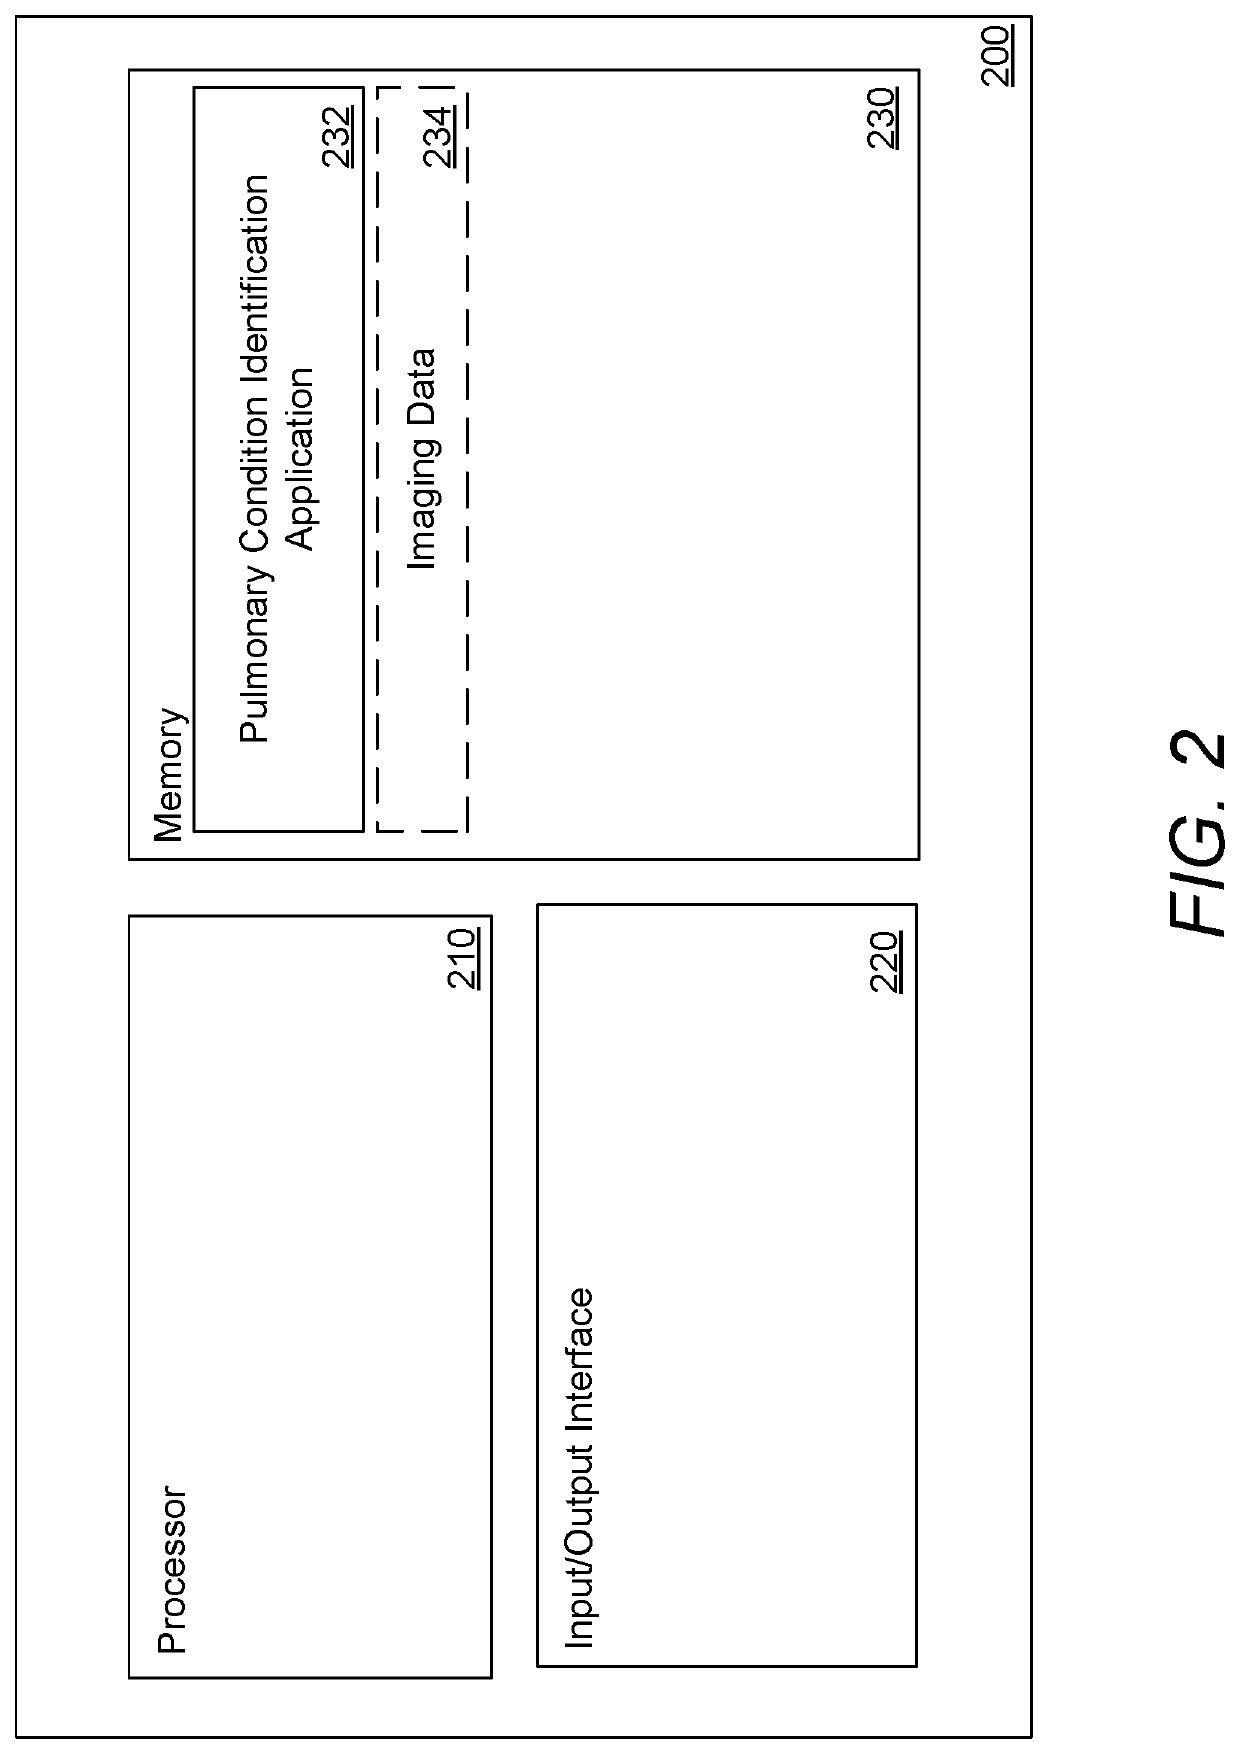 Systems and Methods for Identification of Pulmonary Conditions